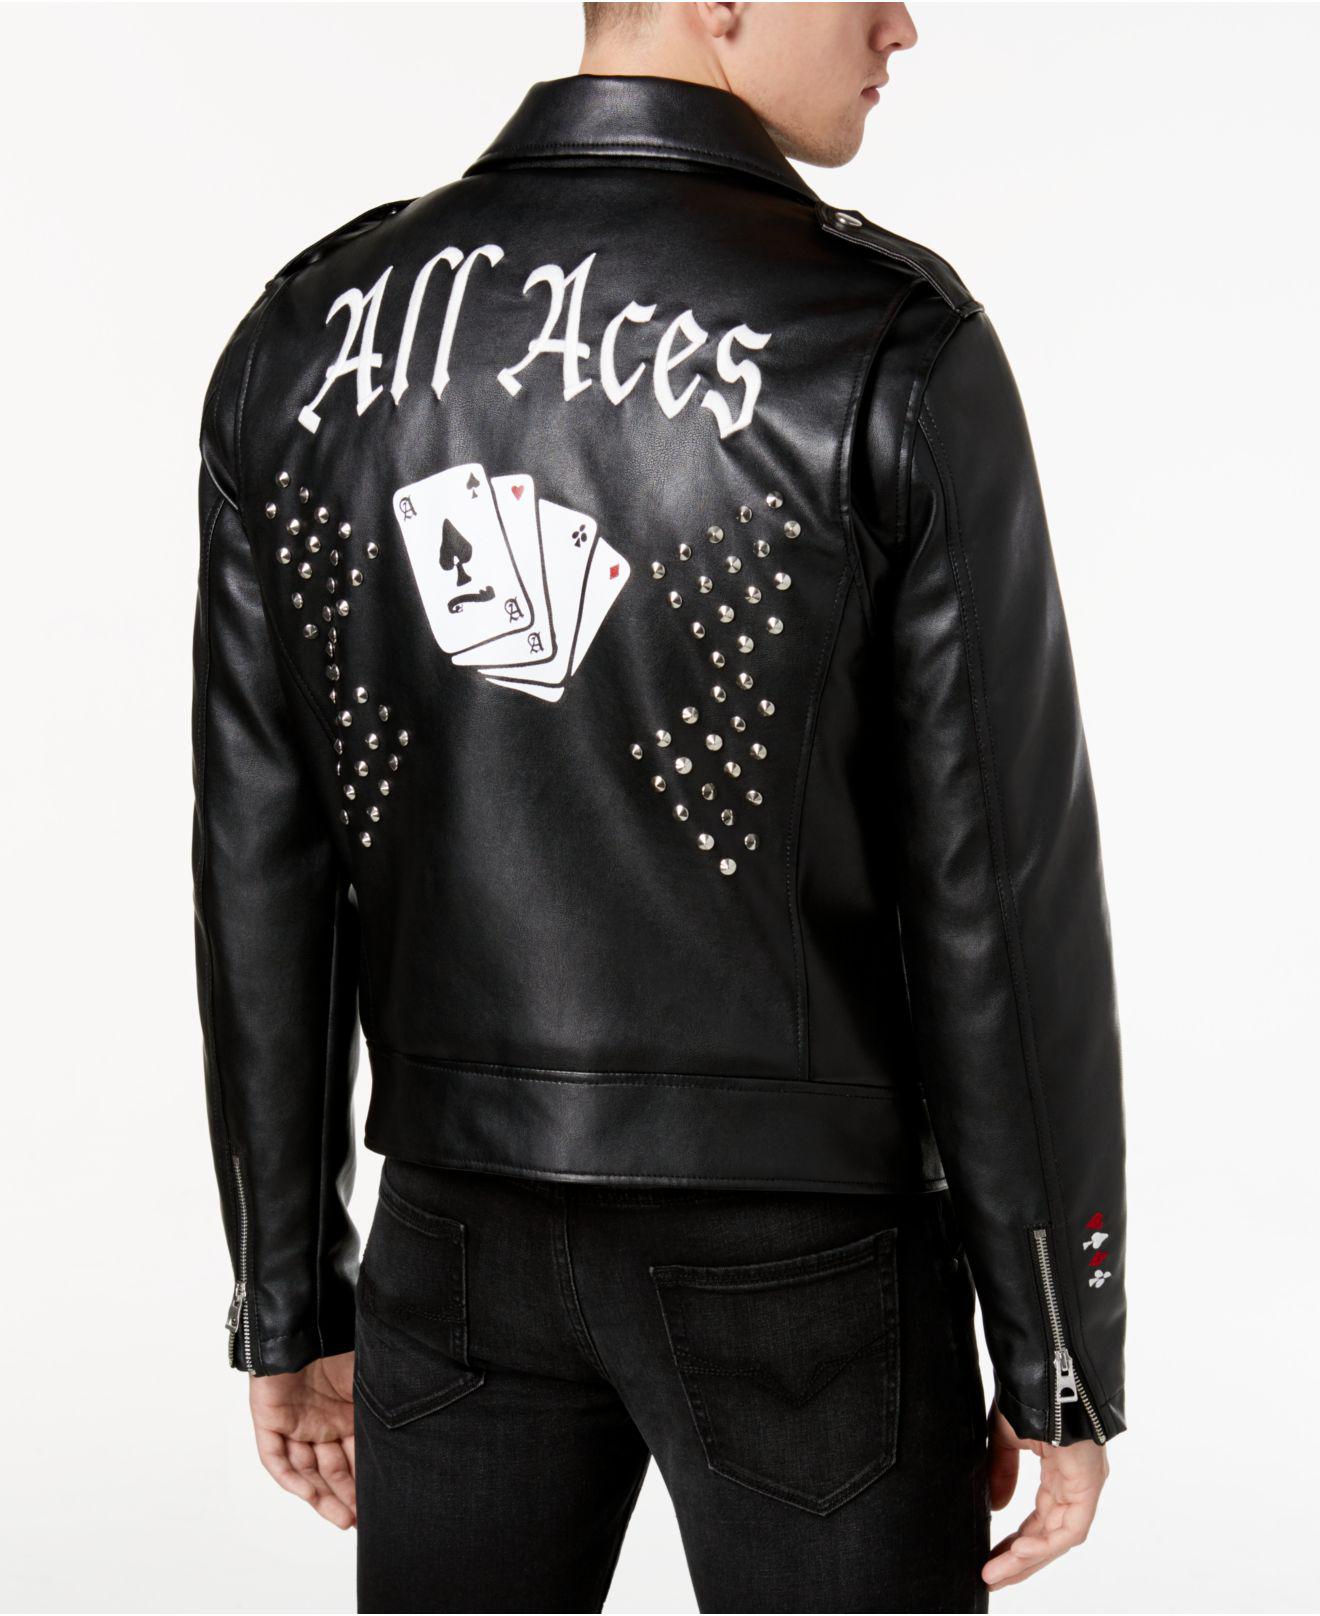 guess all aces jacket